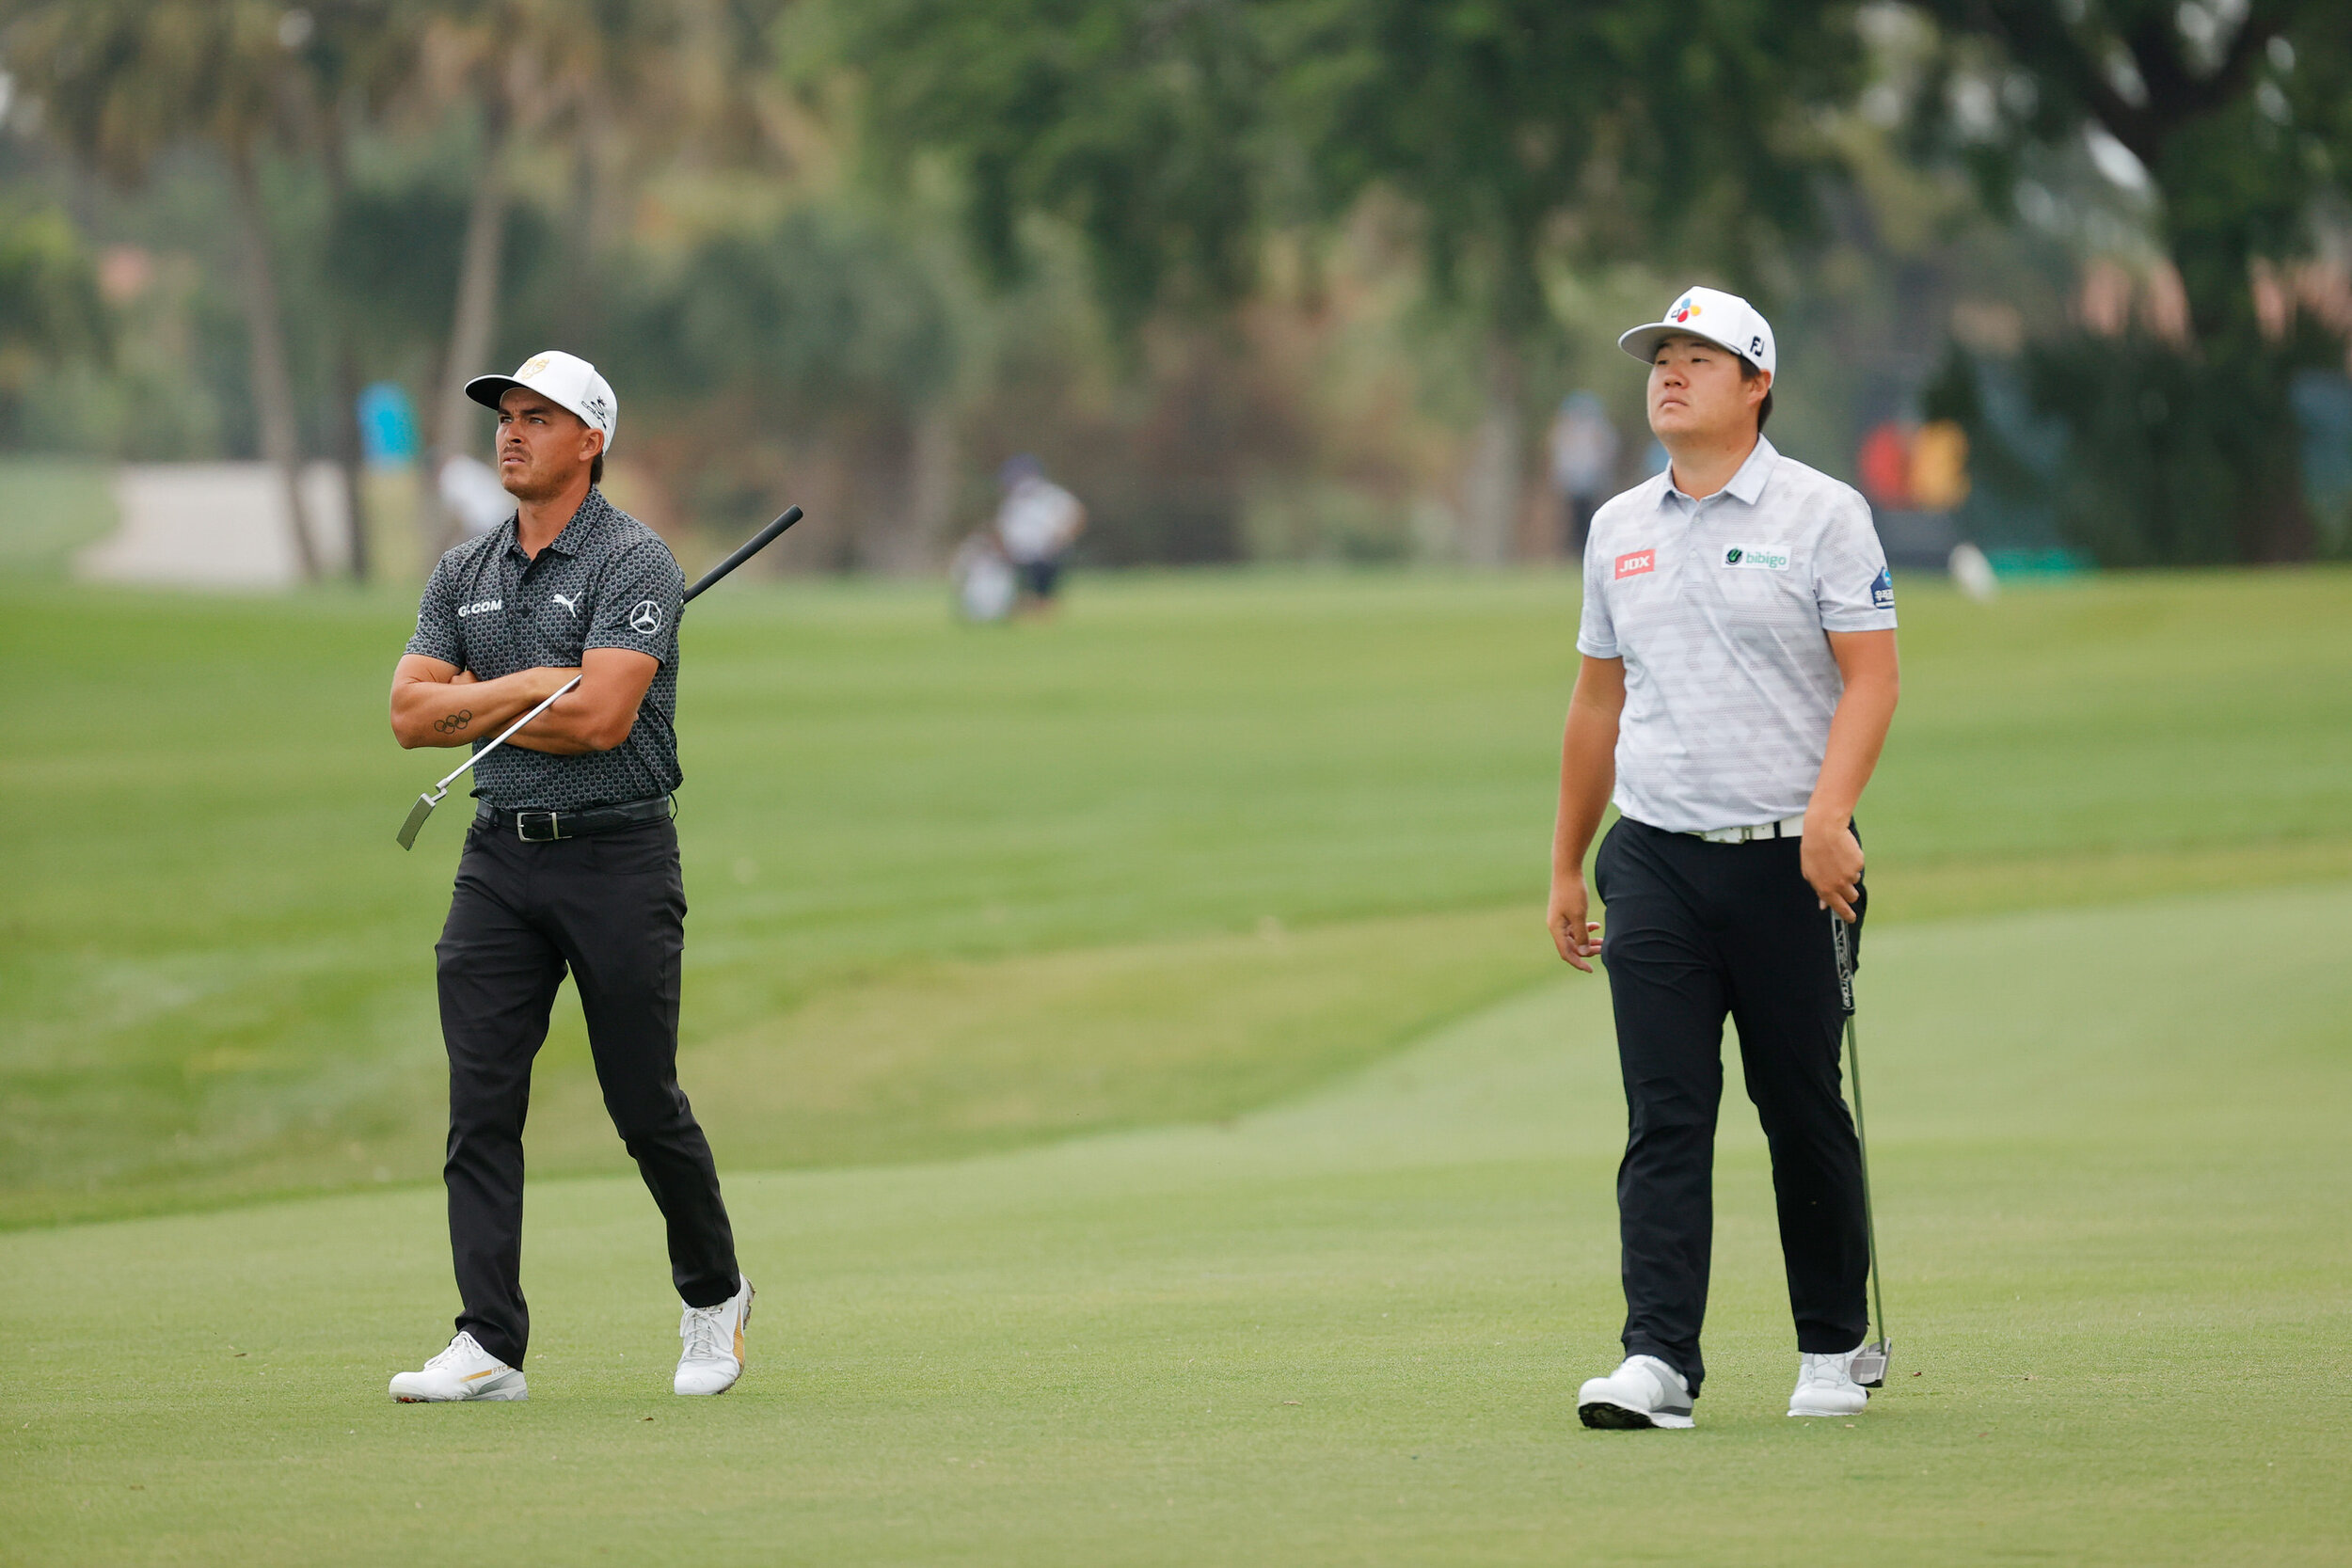  PALM BEACH GARDENS, FLORIDA - MARCH 19: Rickie Fowler of the United States and Sungjae Im of South Korea look on over the 11th hole during the second round of The Honda Classic at PGA National Champion course on March 19, 2021 in Palm Beach Gardens,